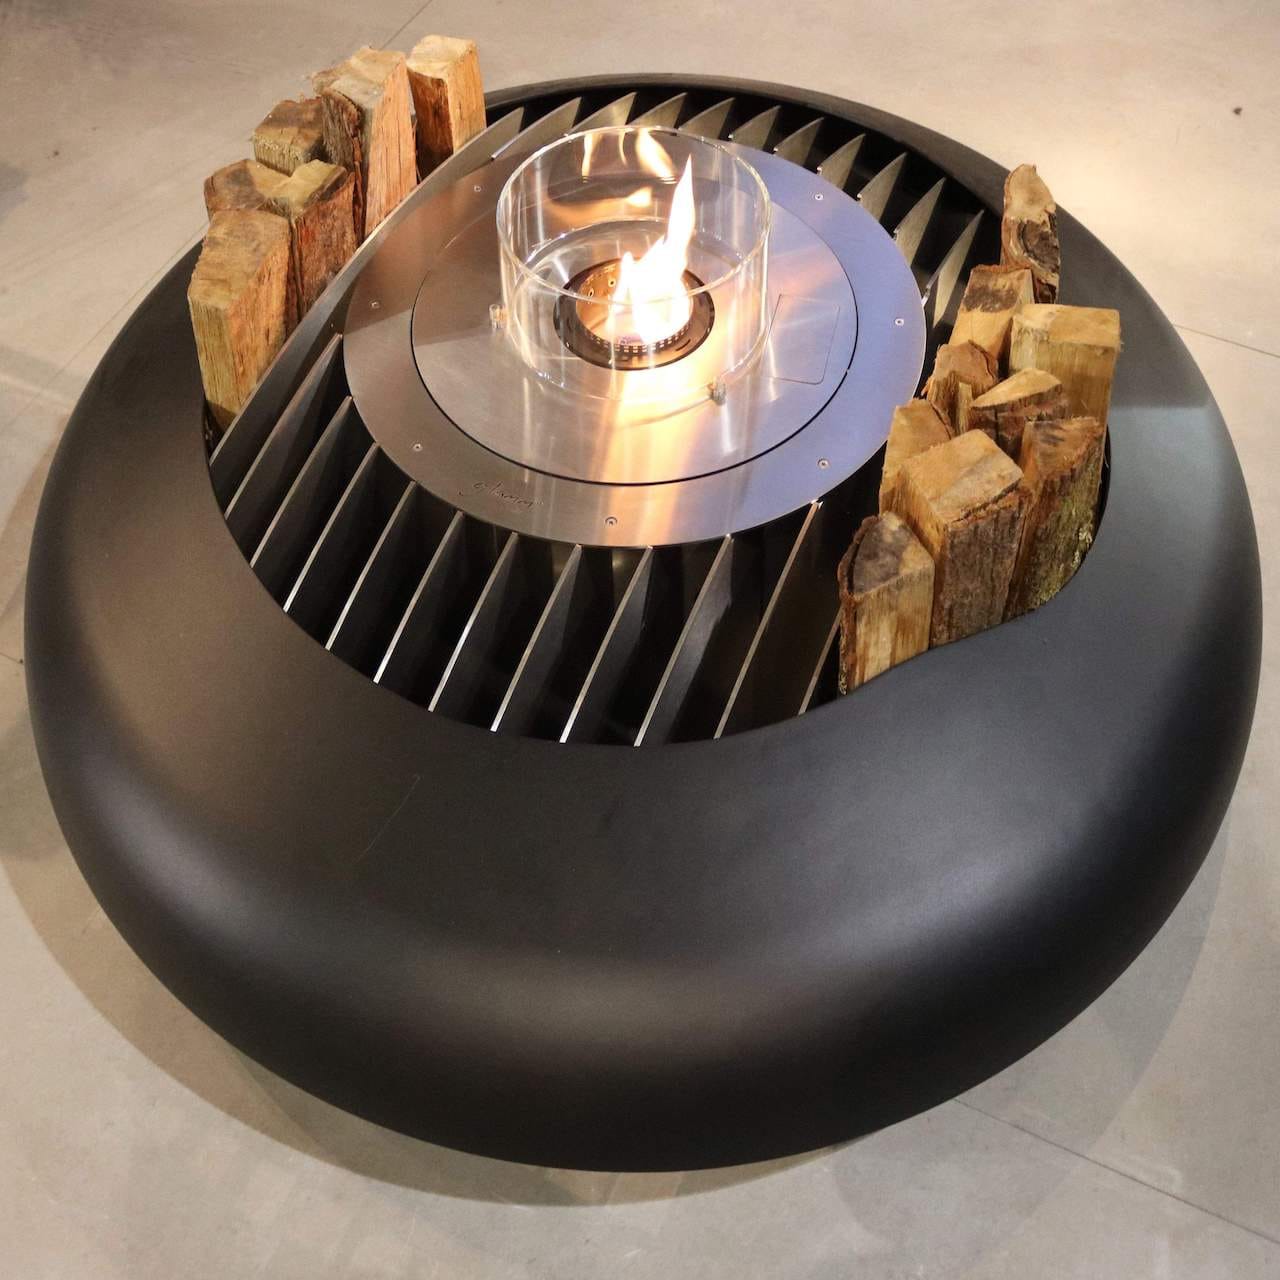 Mime Fire Pit